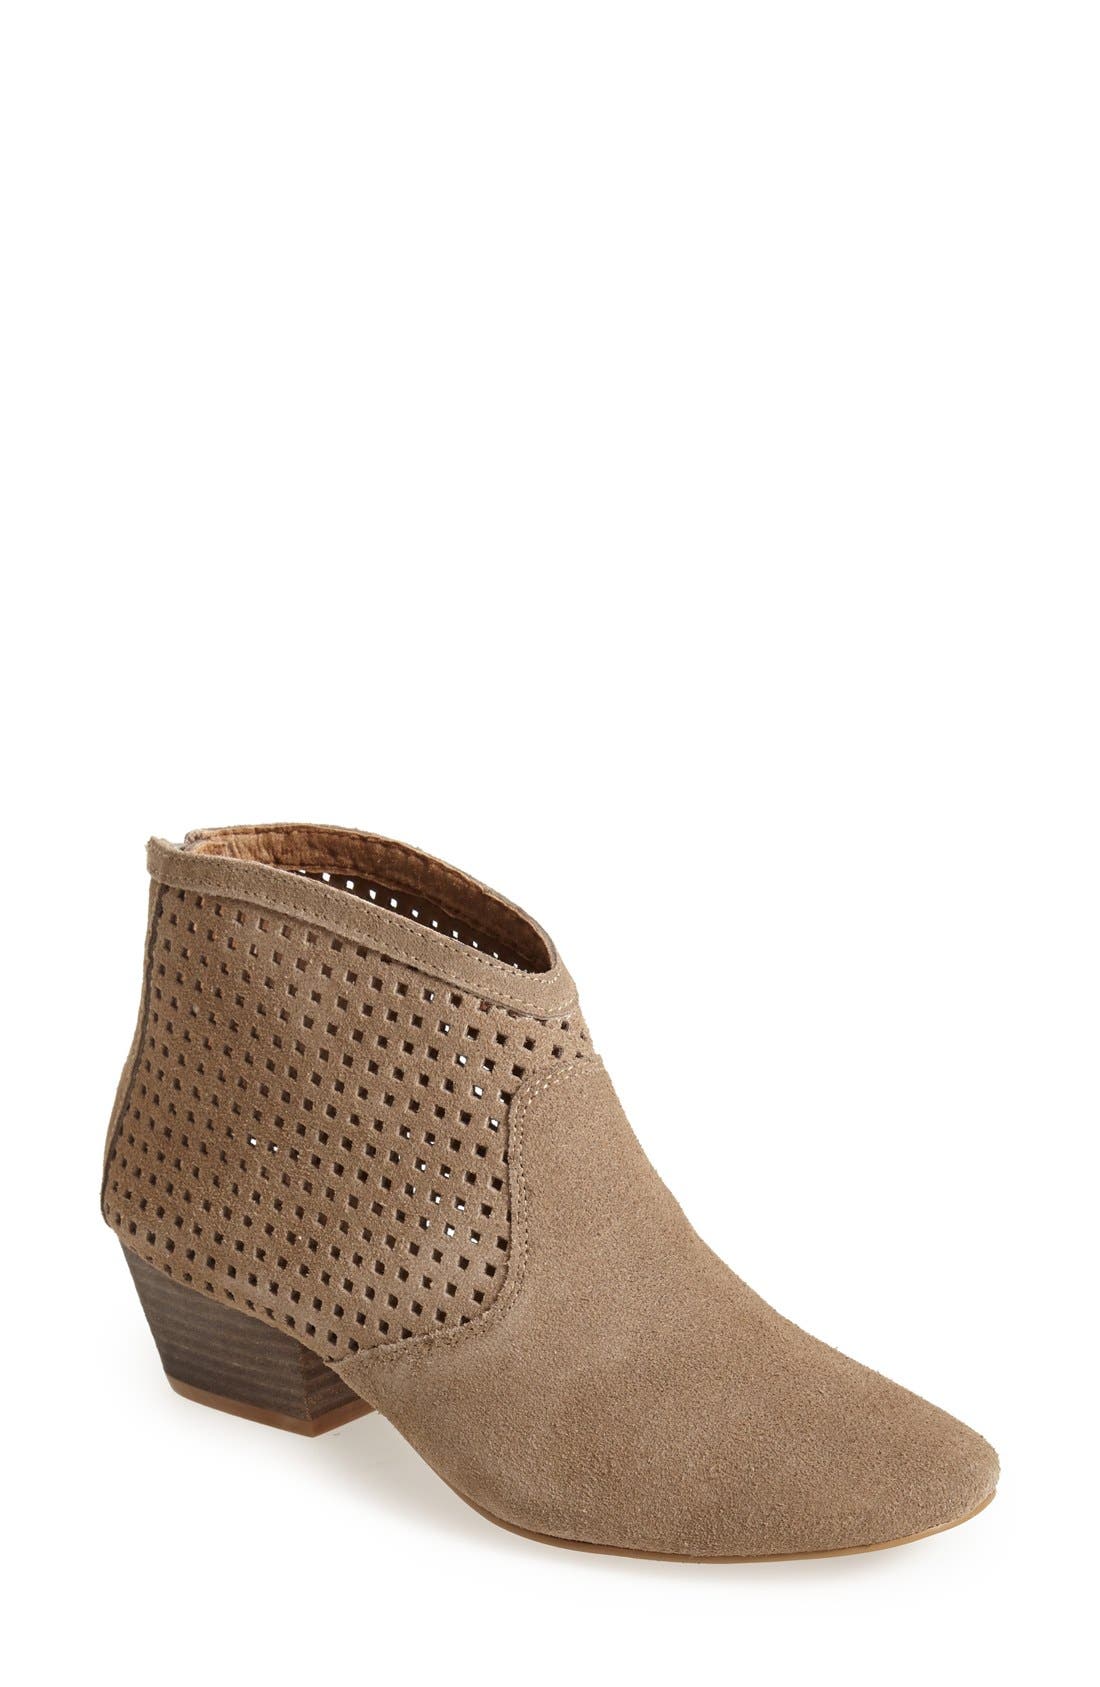 SIXTYSEVEN 'Sofia' Perforated Suede 